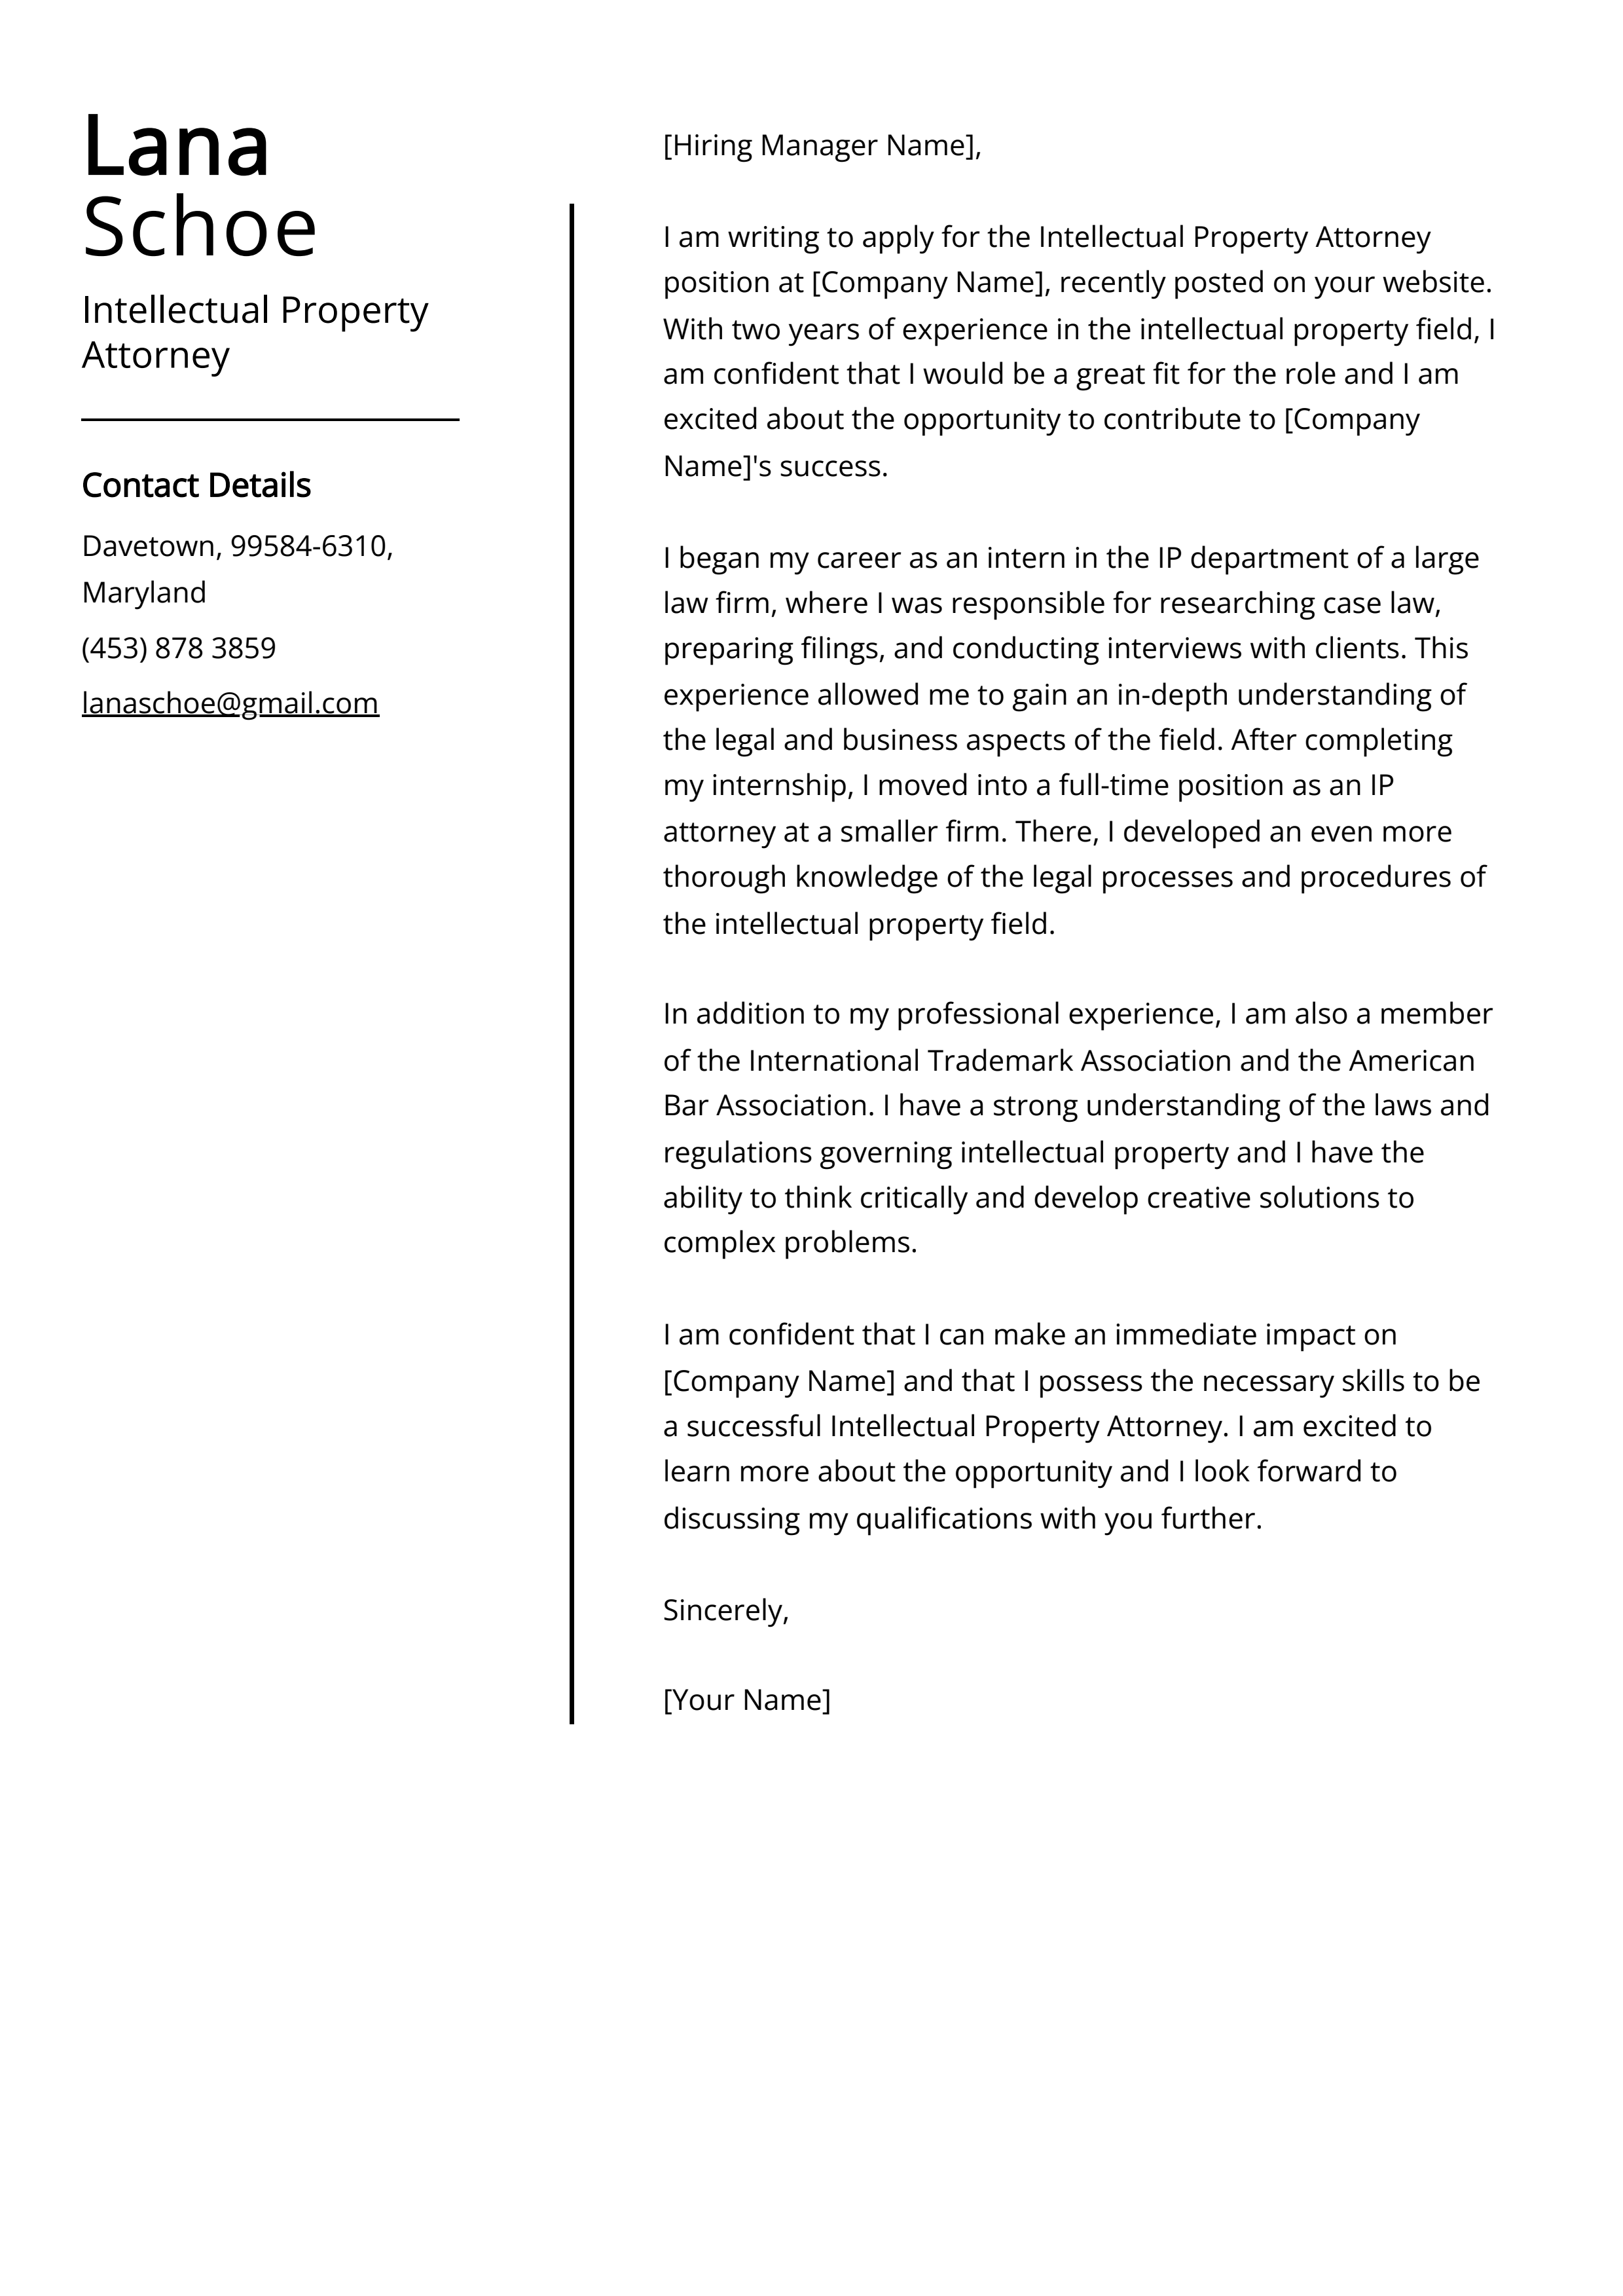 Intellectual Property Attorney Cover Letter Example